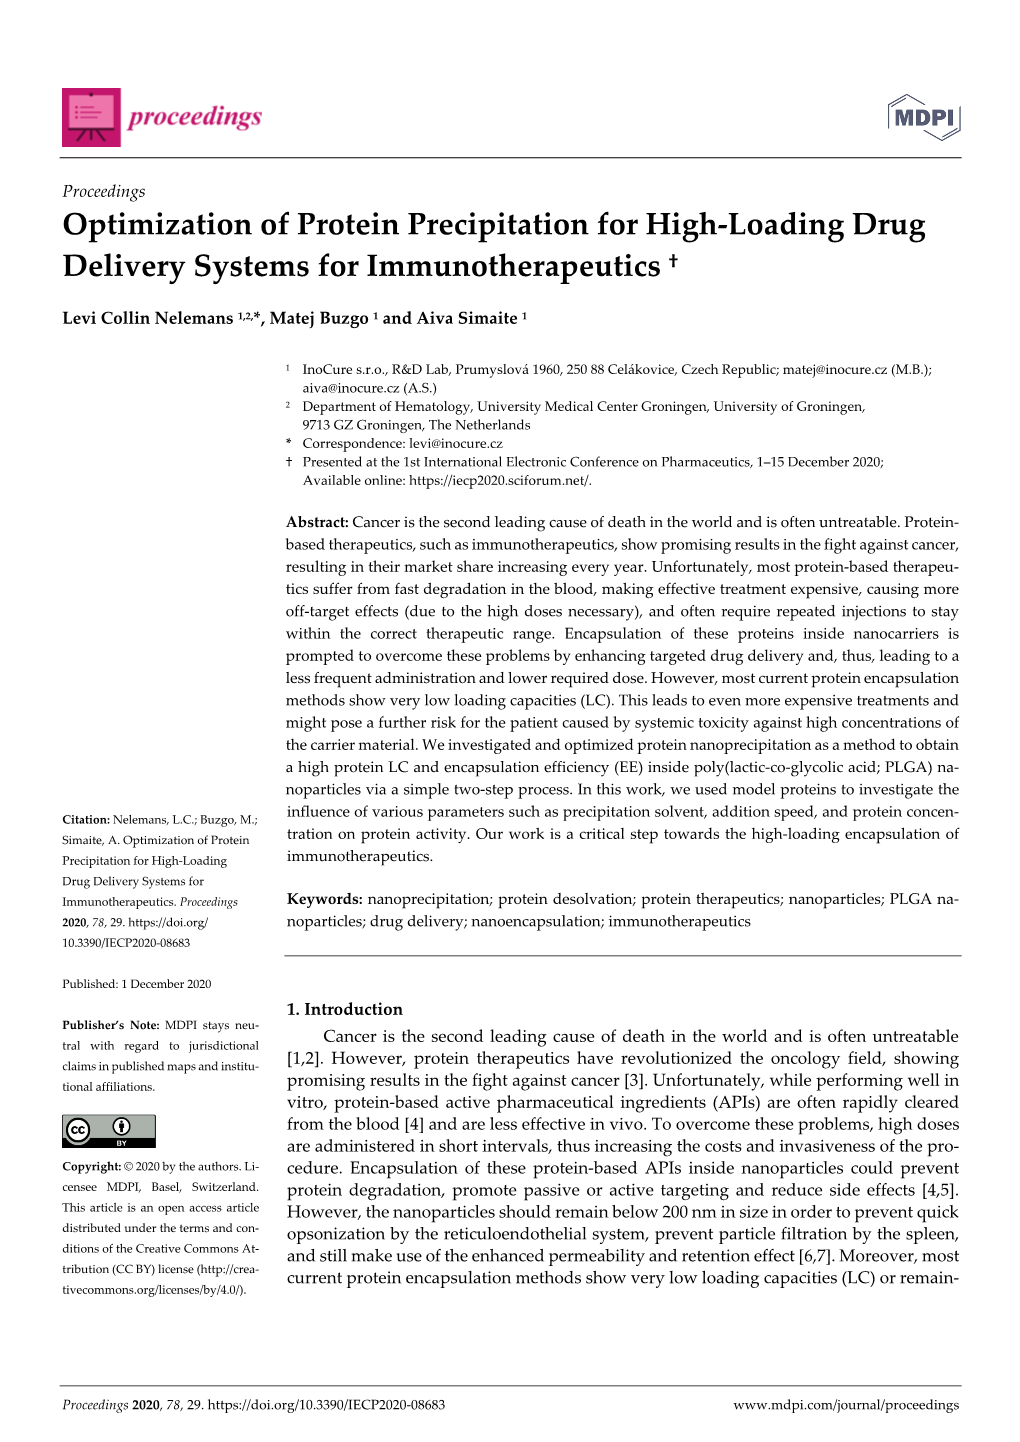 Optimization of Protein Precipitation for High-Loading Drug Delivery Systems for Immunotherapeutics †